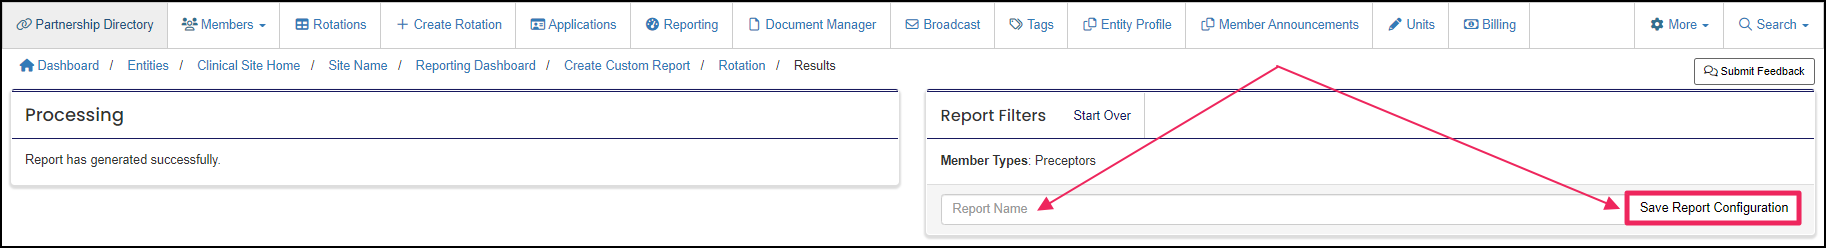 Report Name and Save Report Button